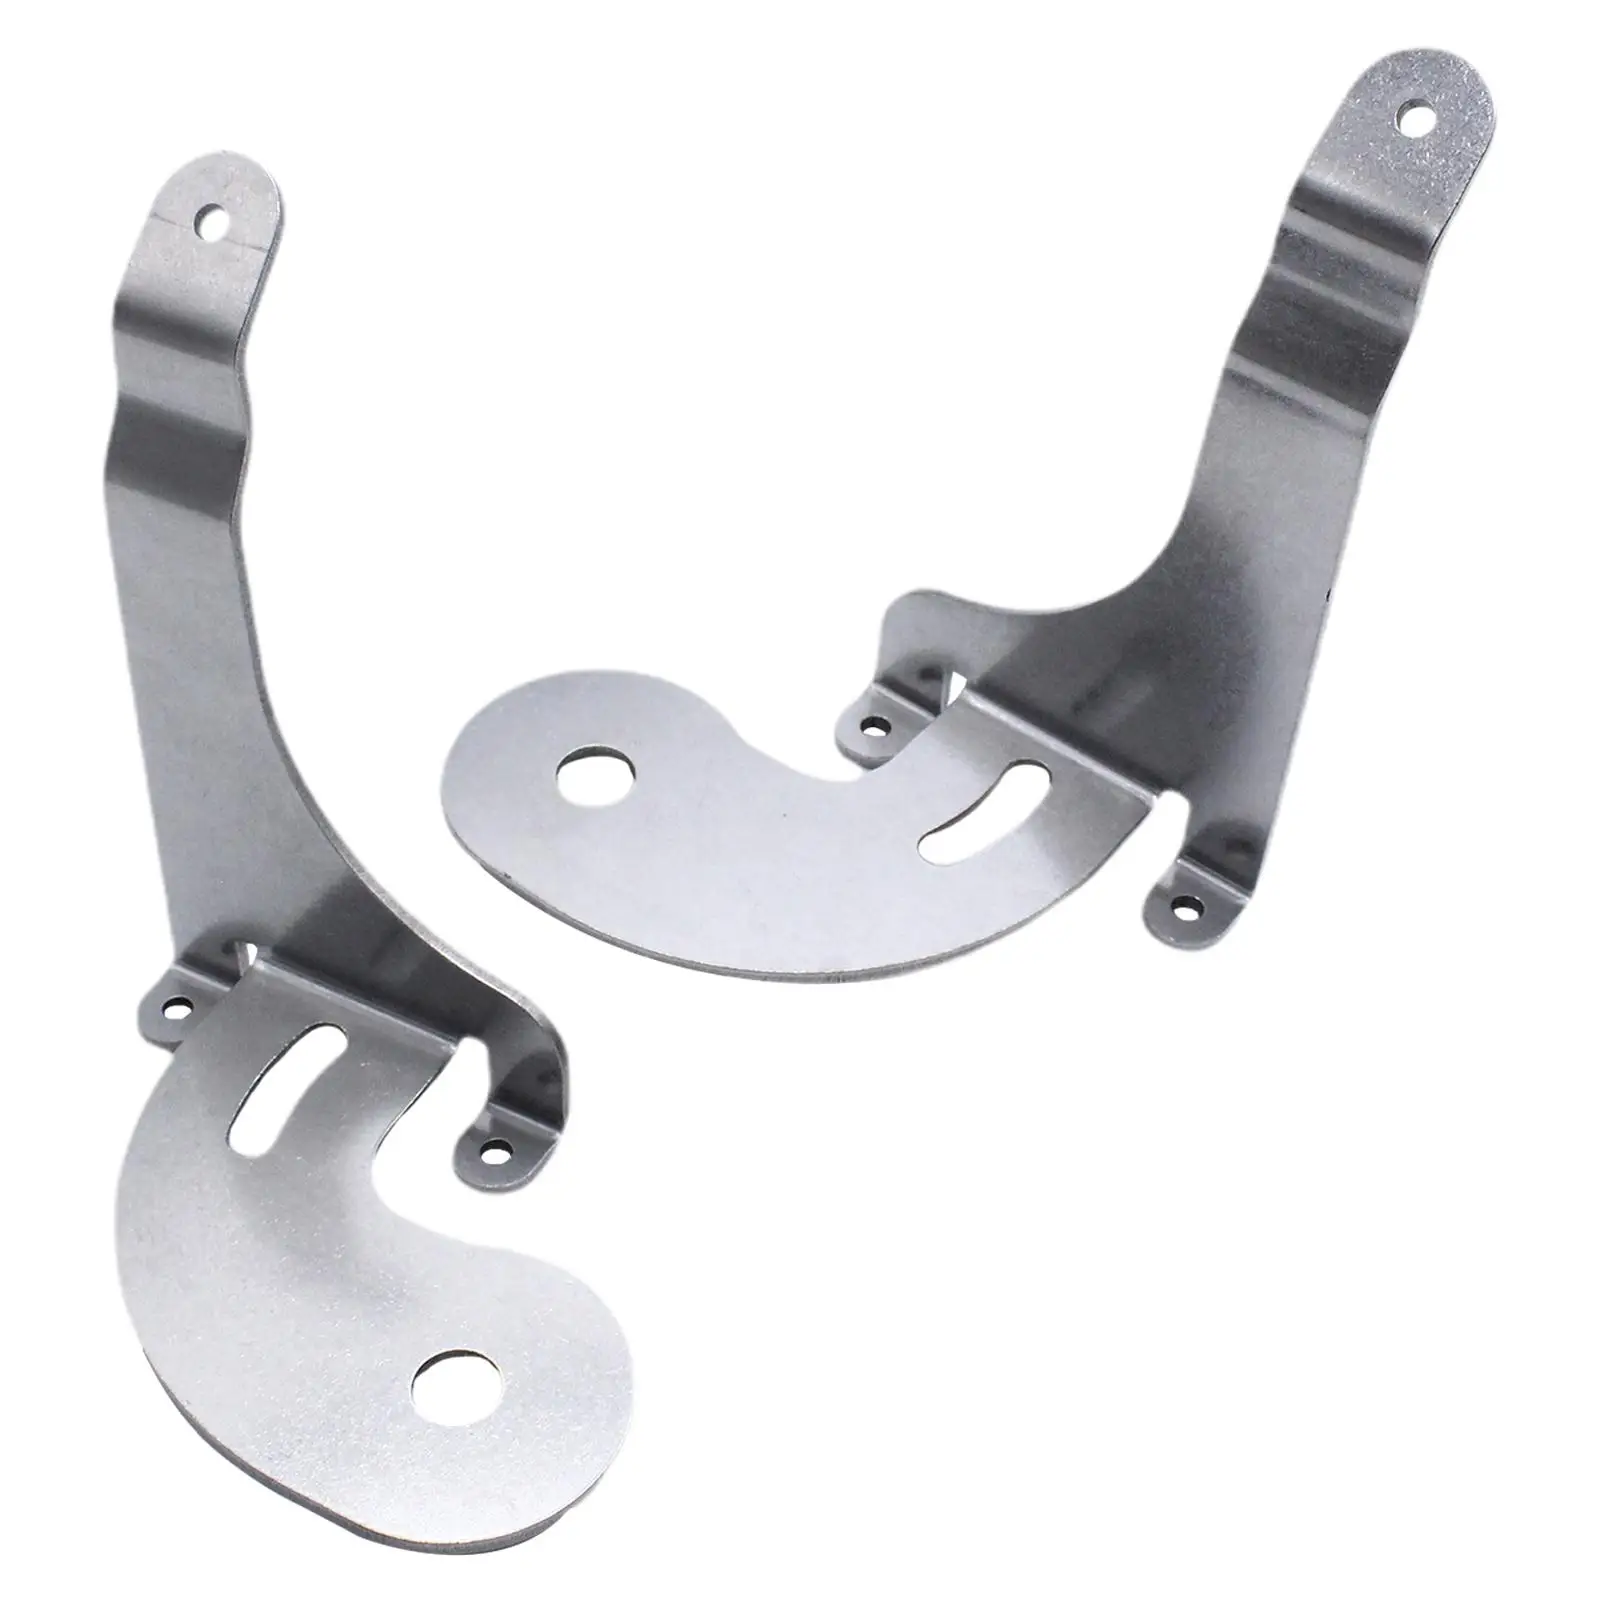 1 Pair Spot Light Brackets Metal Vehicle Replace Spotlamp Fits for BMW Mini S One